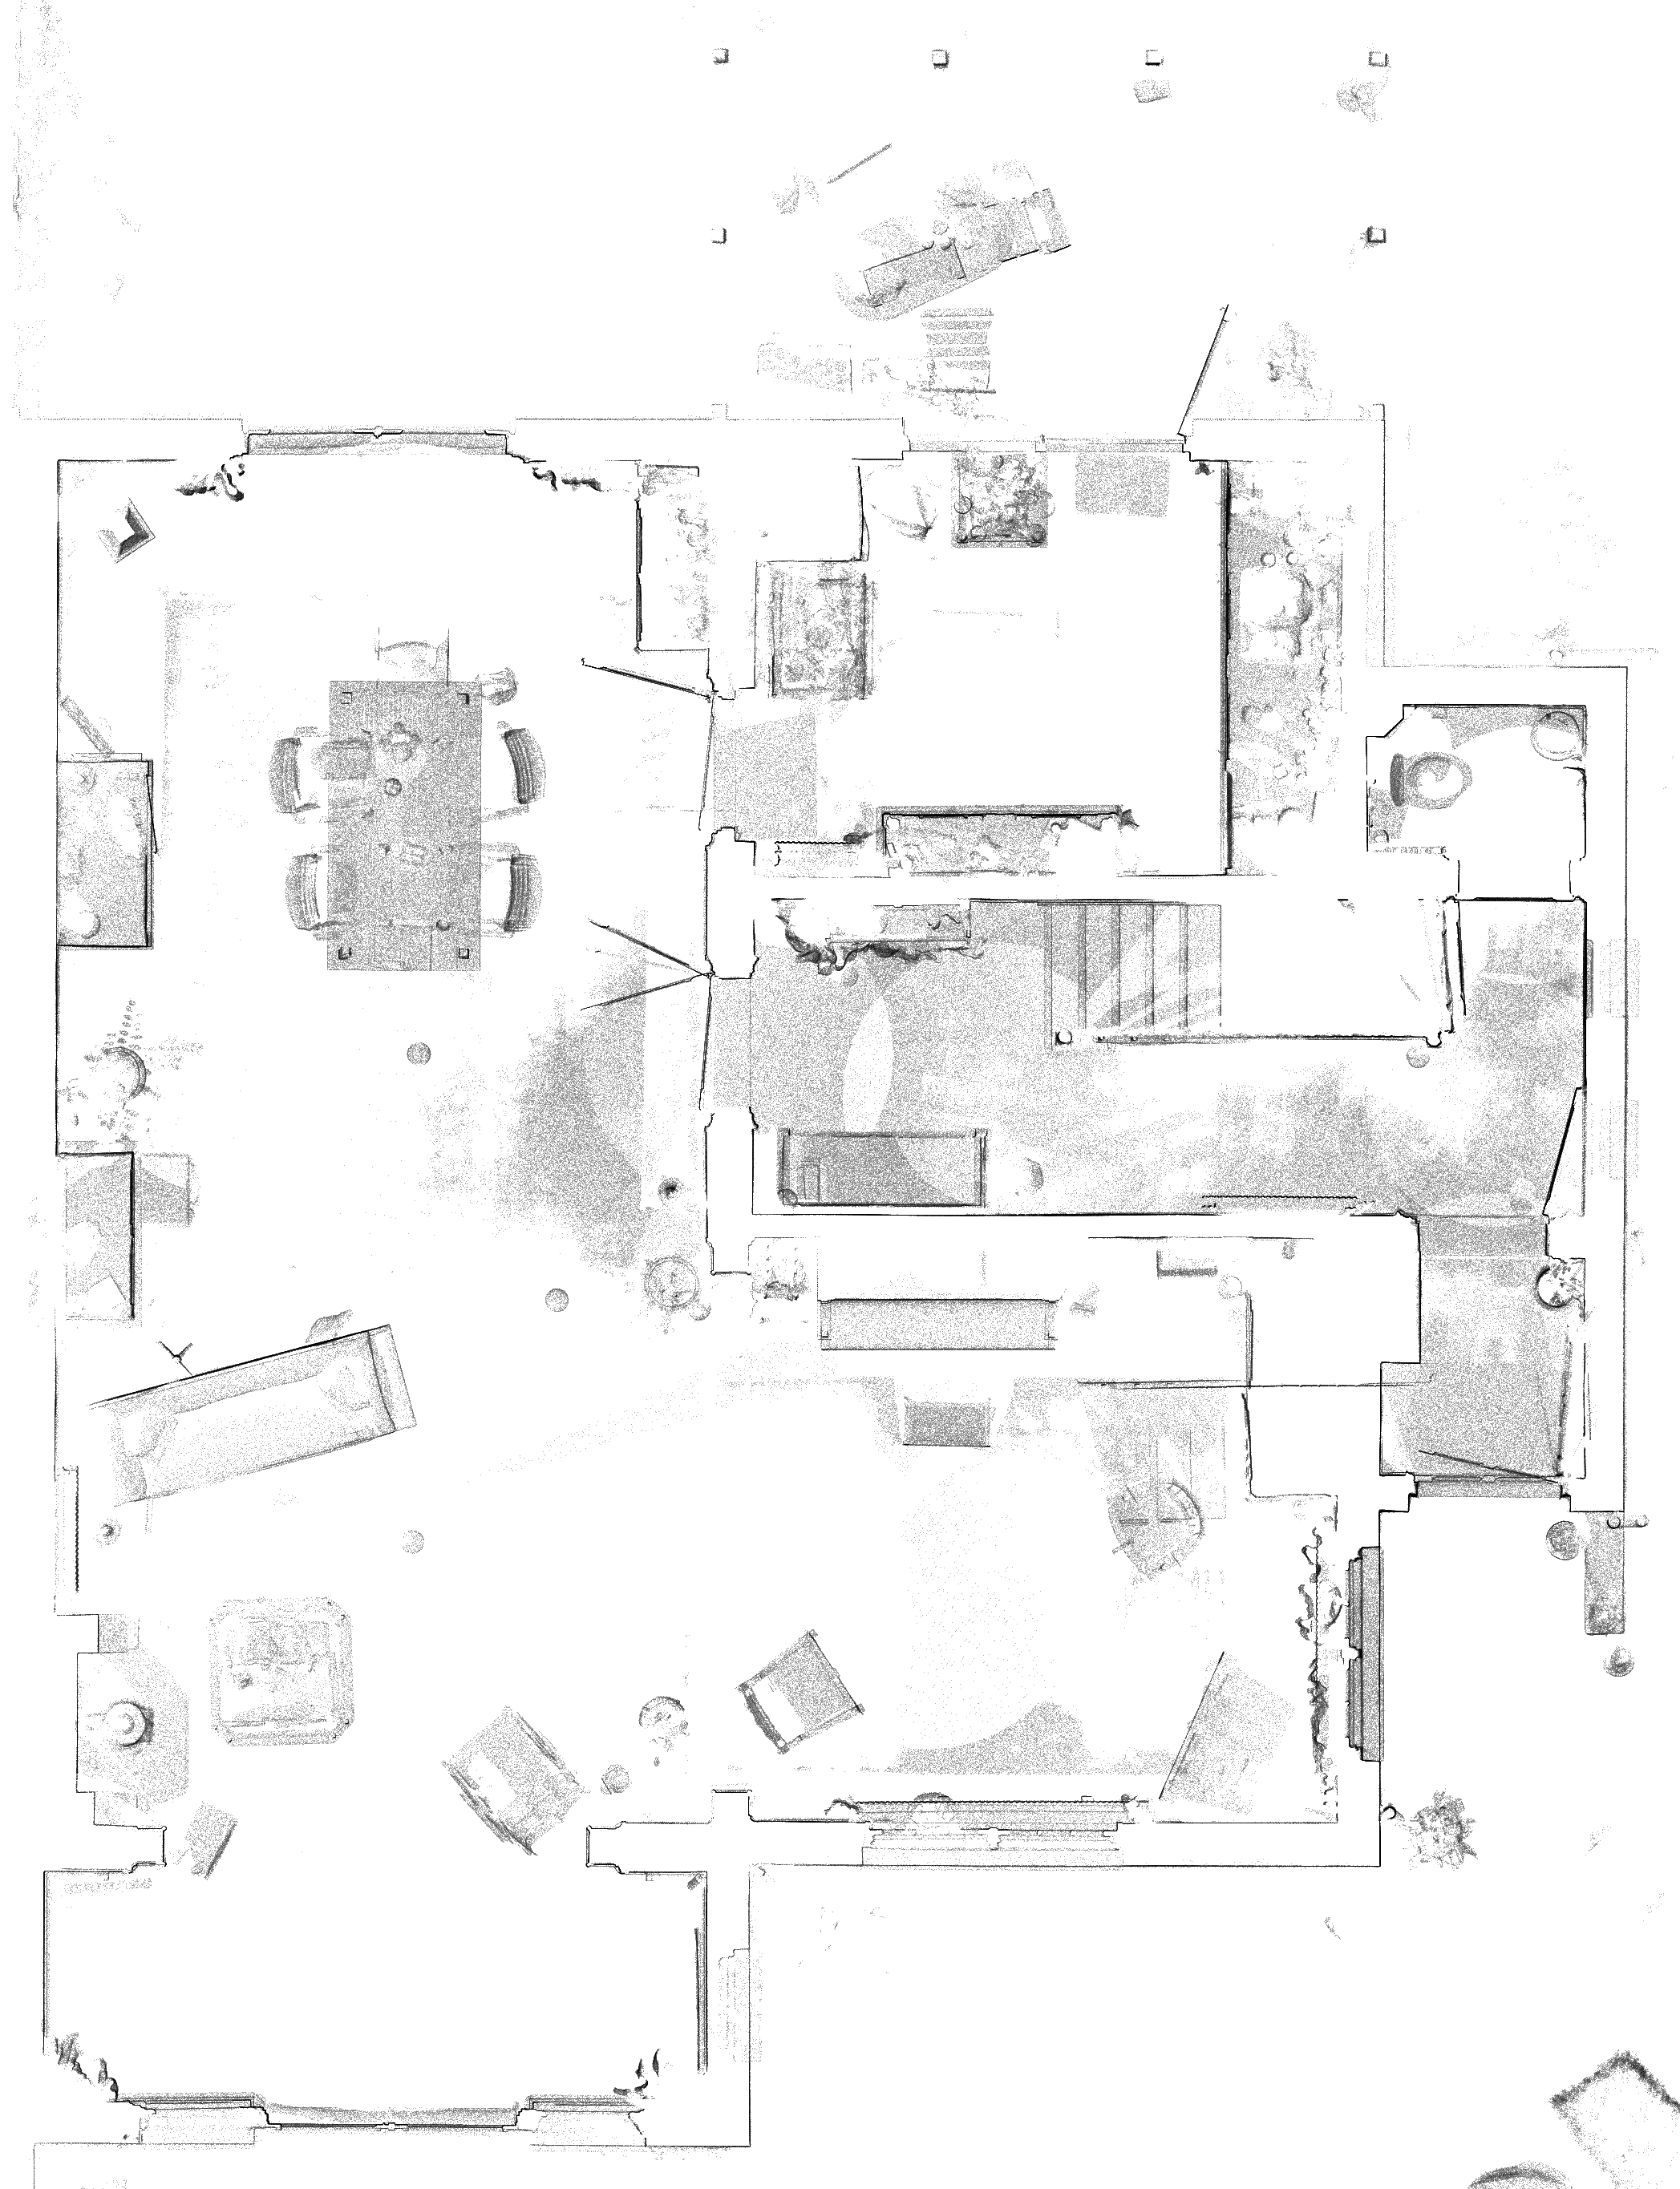 Plans and elevations from Laser Scans